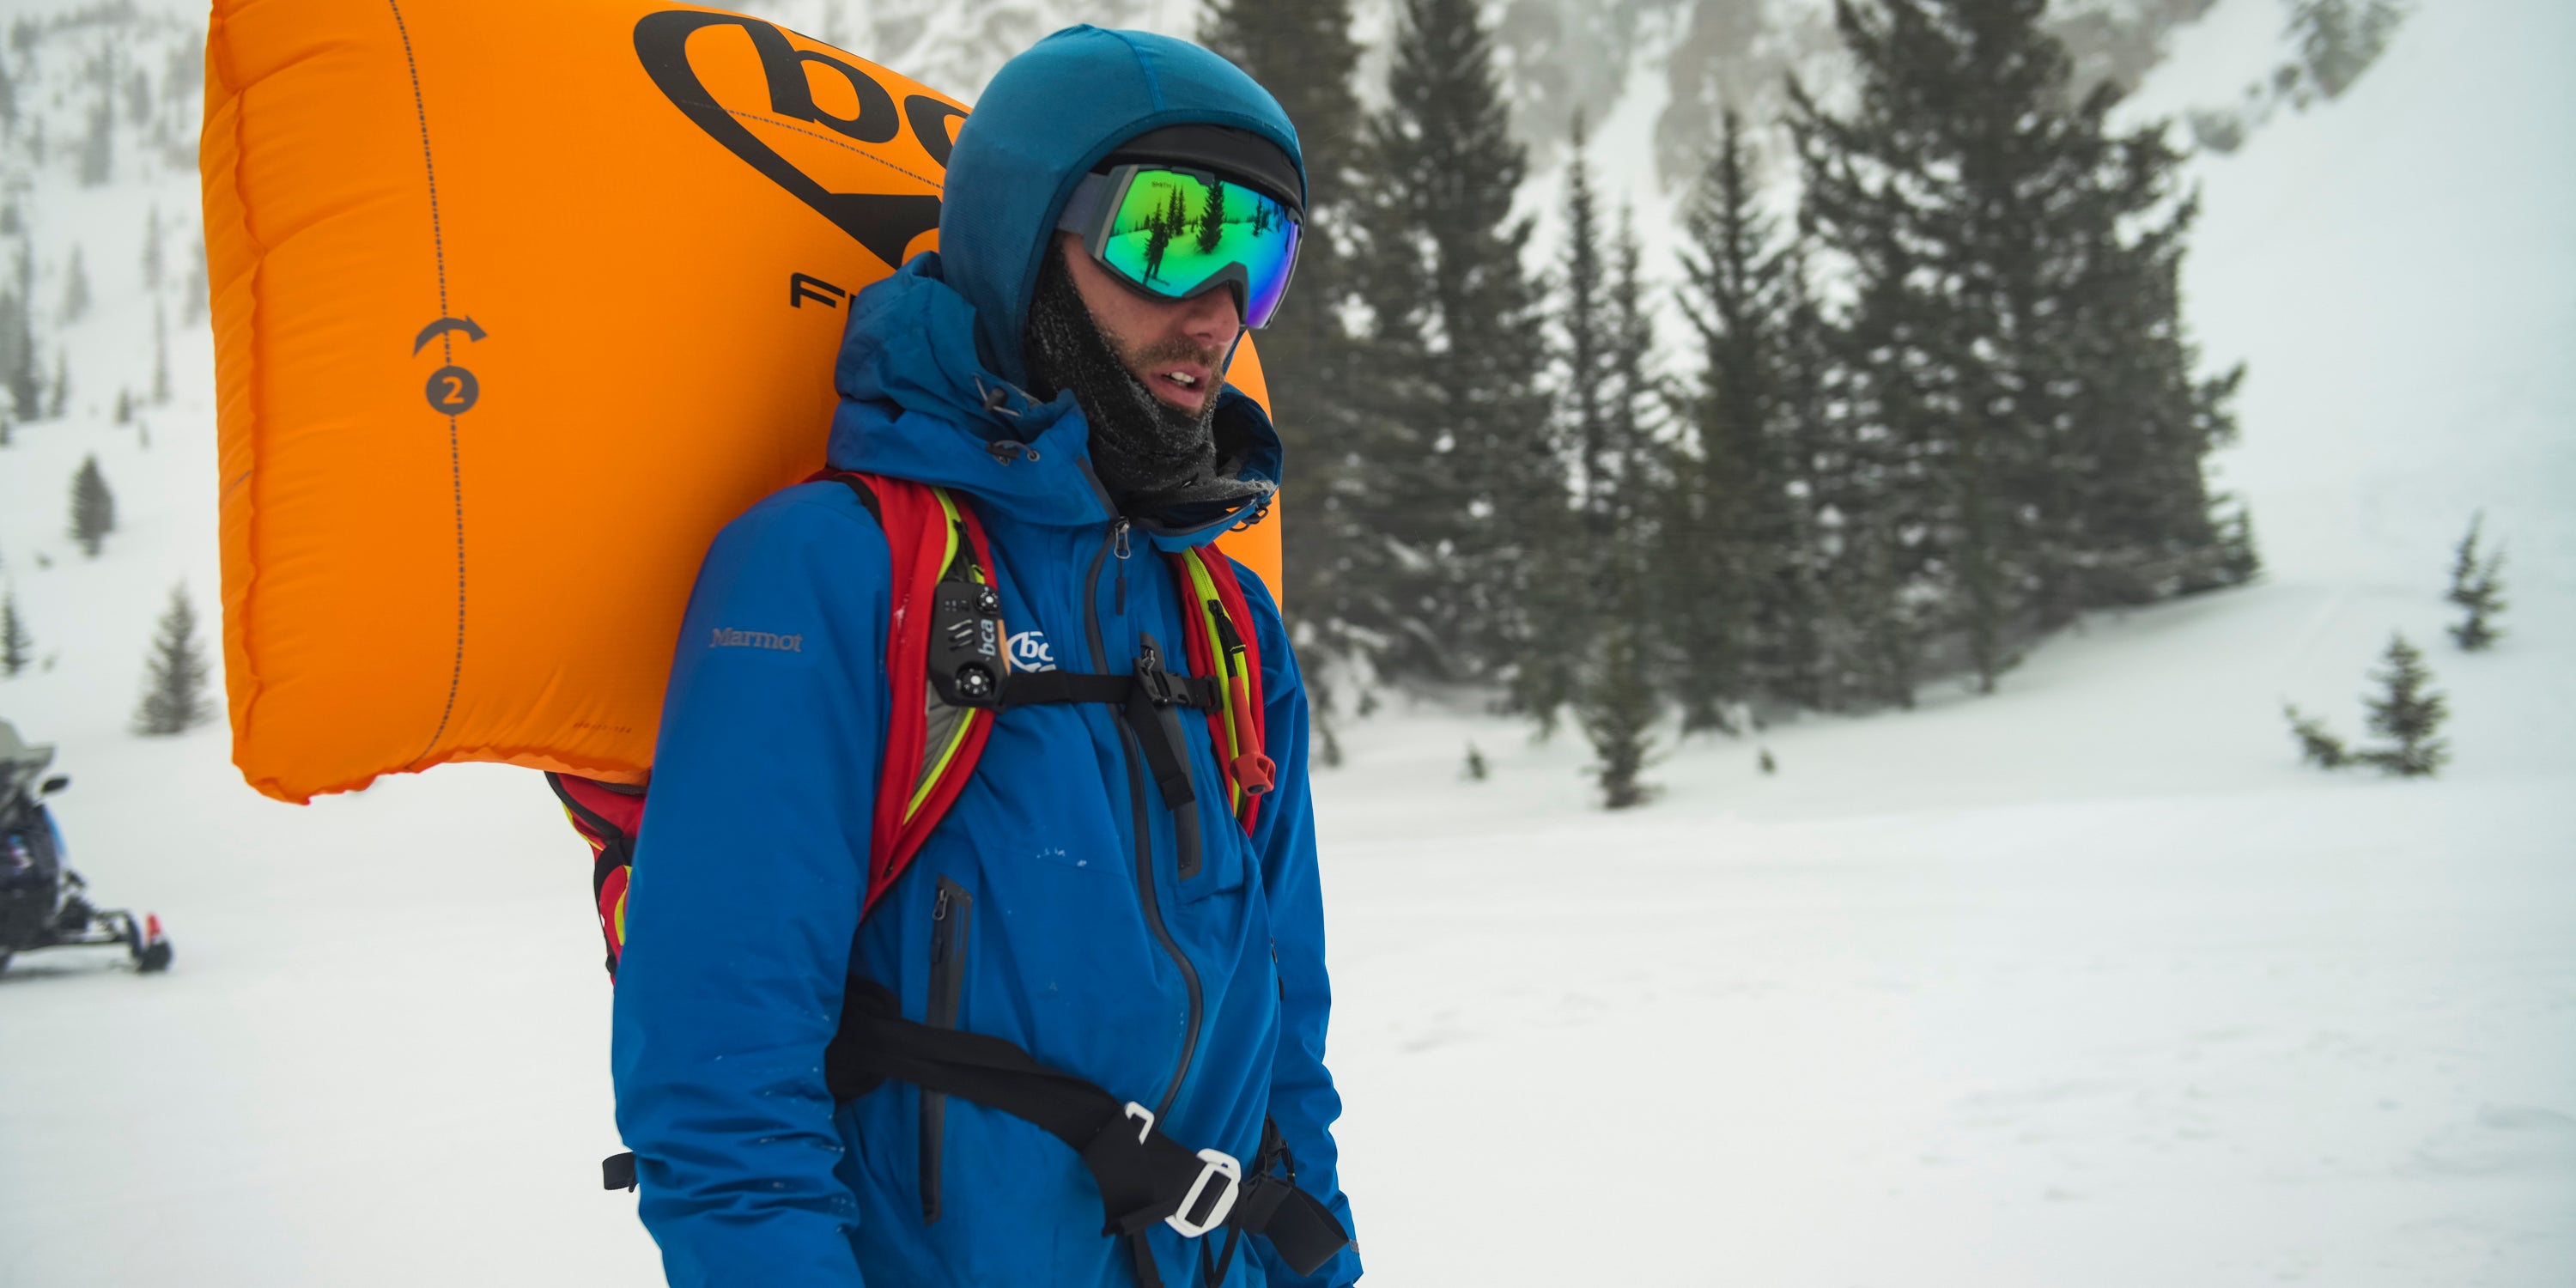 Avalanche Airbag Packs